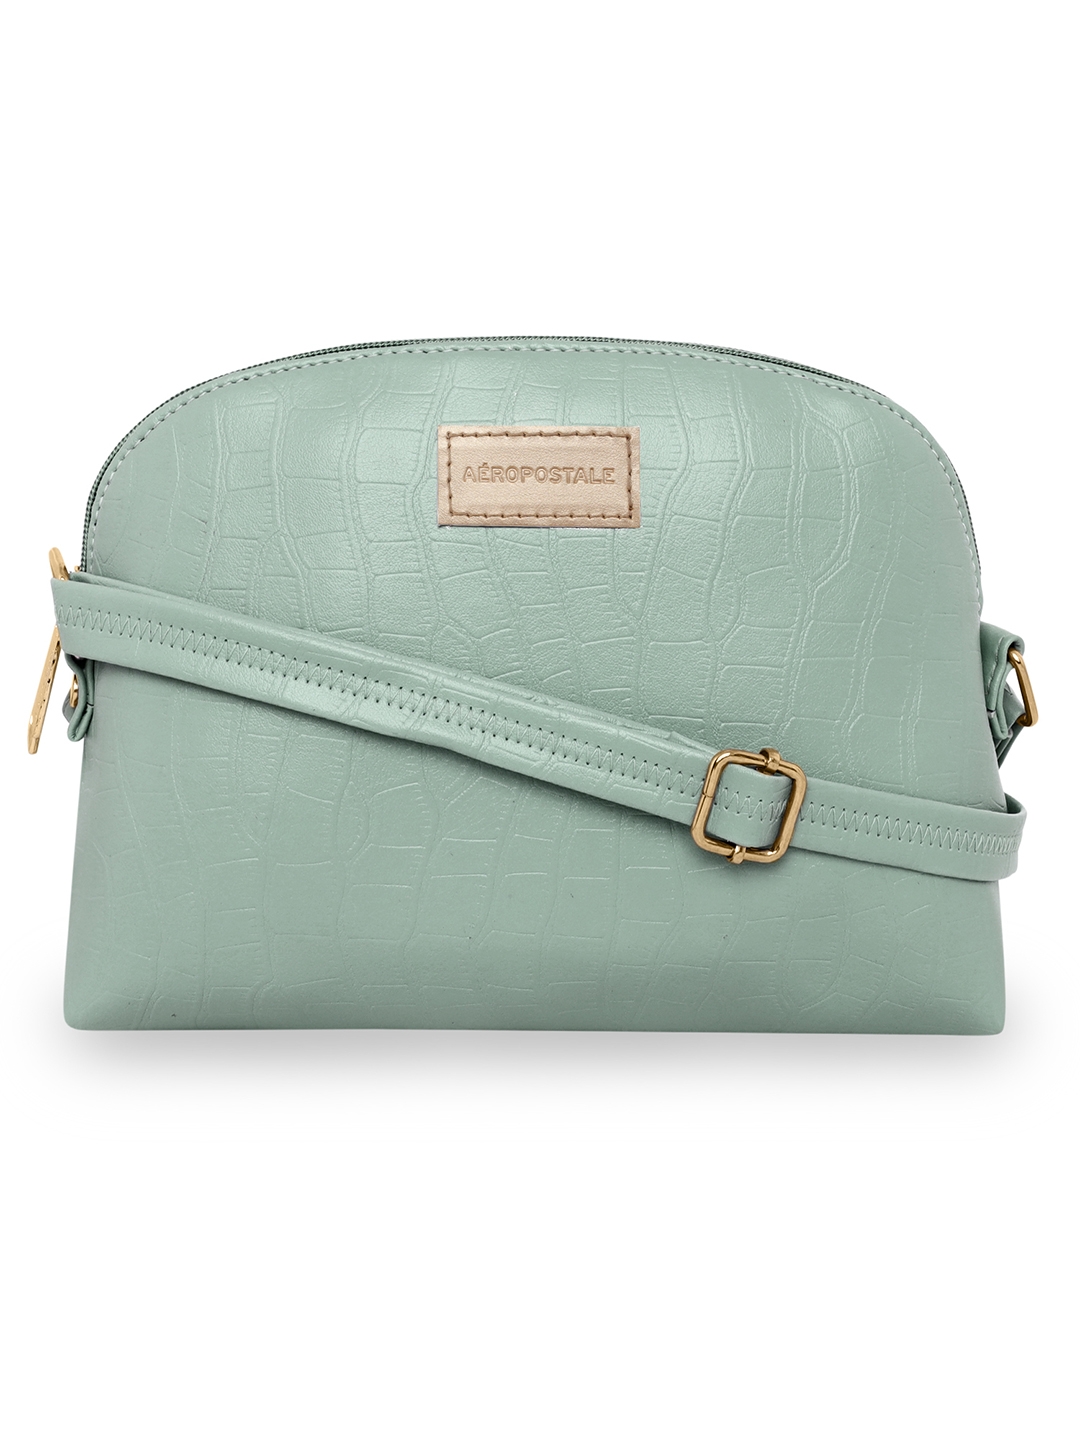 Aeropostale | Aeropostale Textured Kylie PU Sling Bag with non-detachable strap (Green)